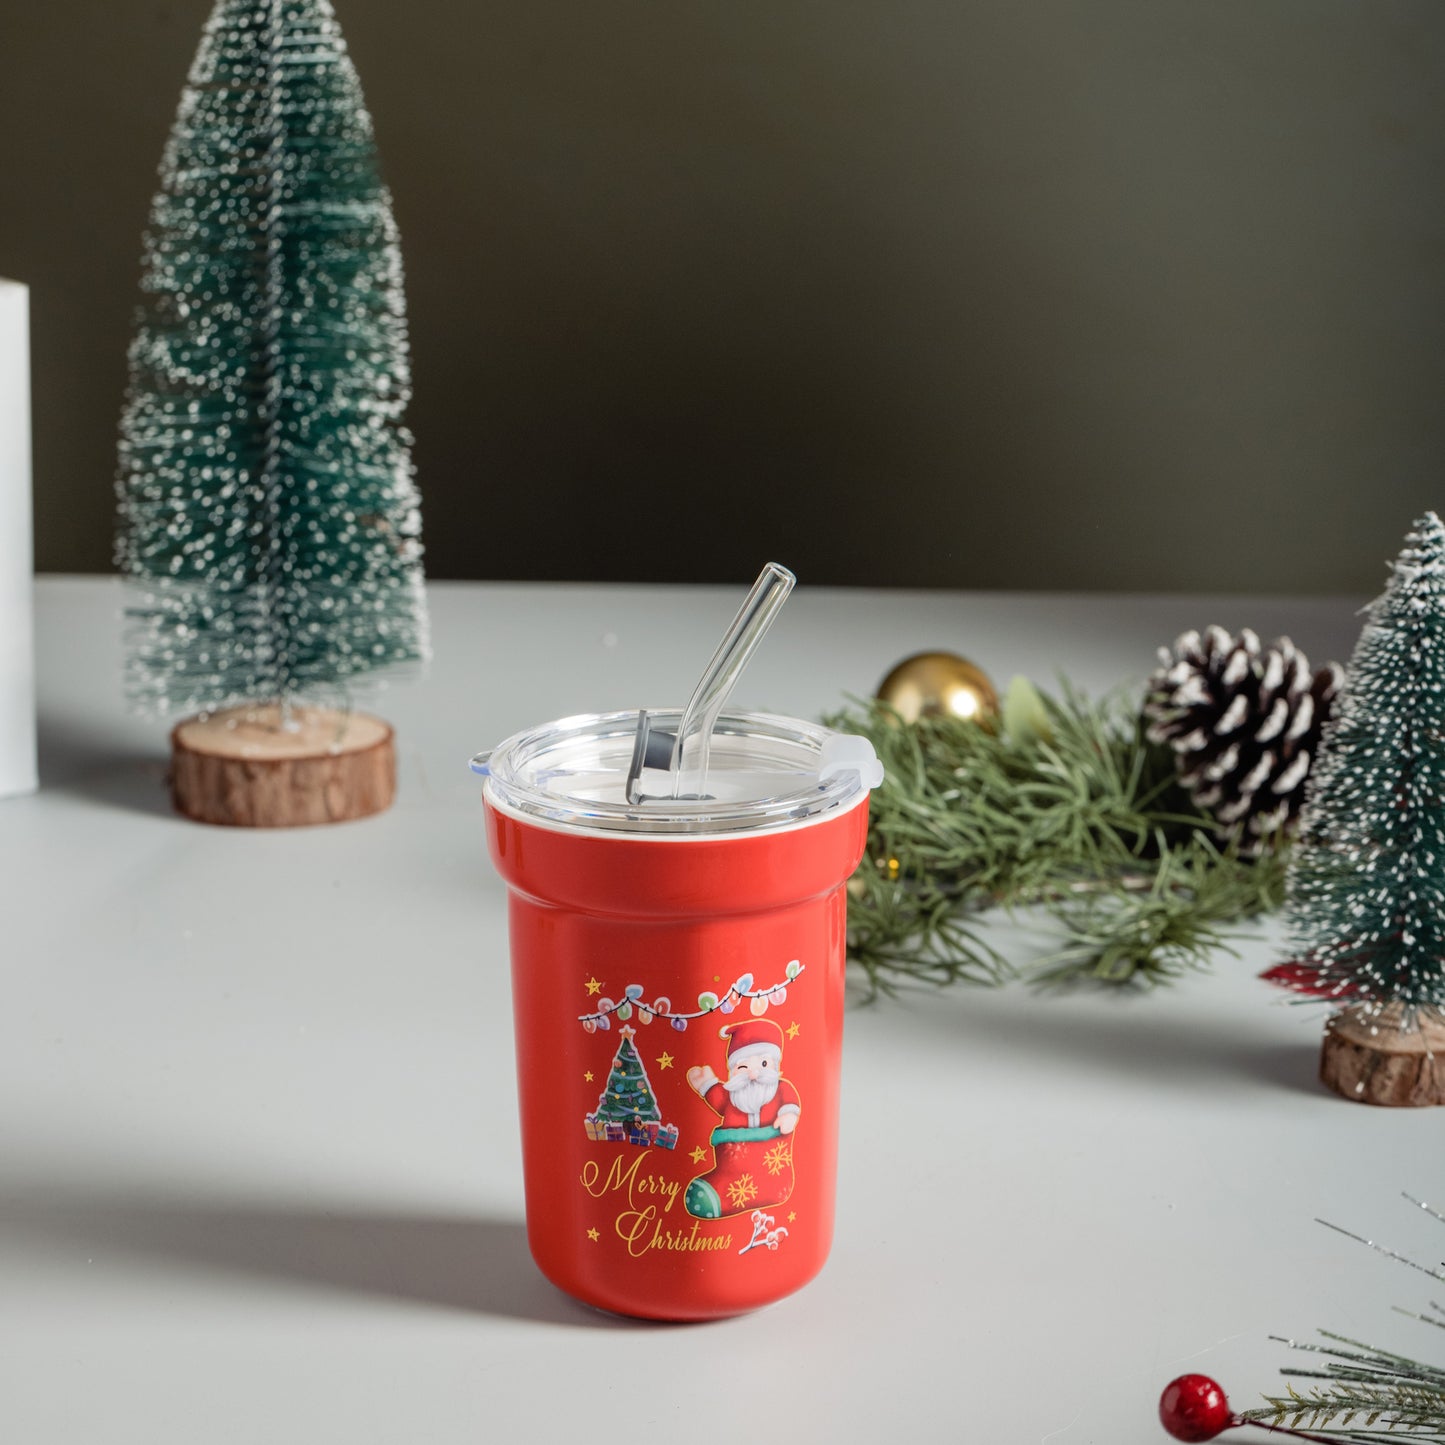 Christmas ceramic sipper with glass straw